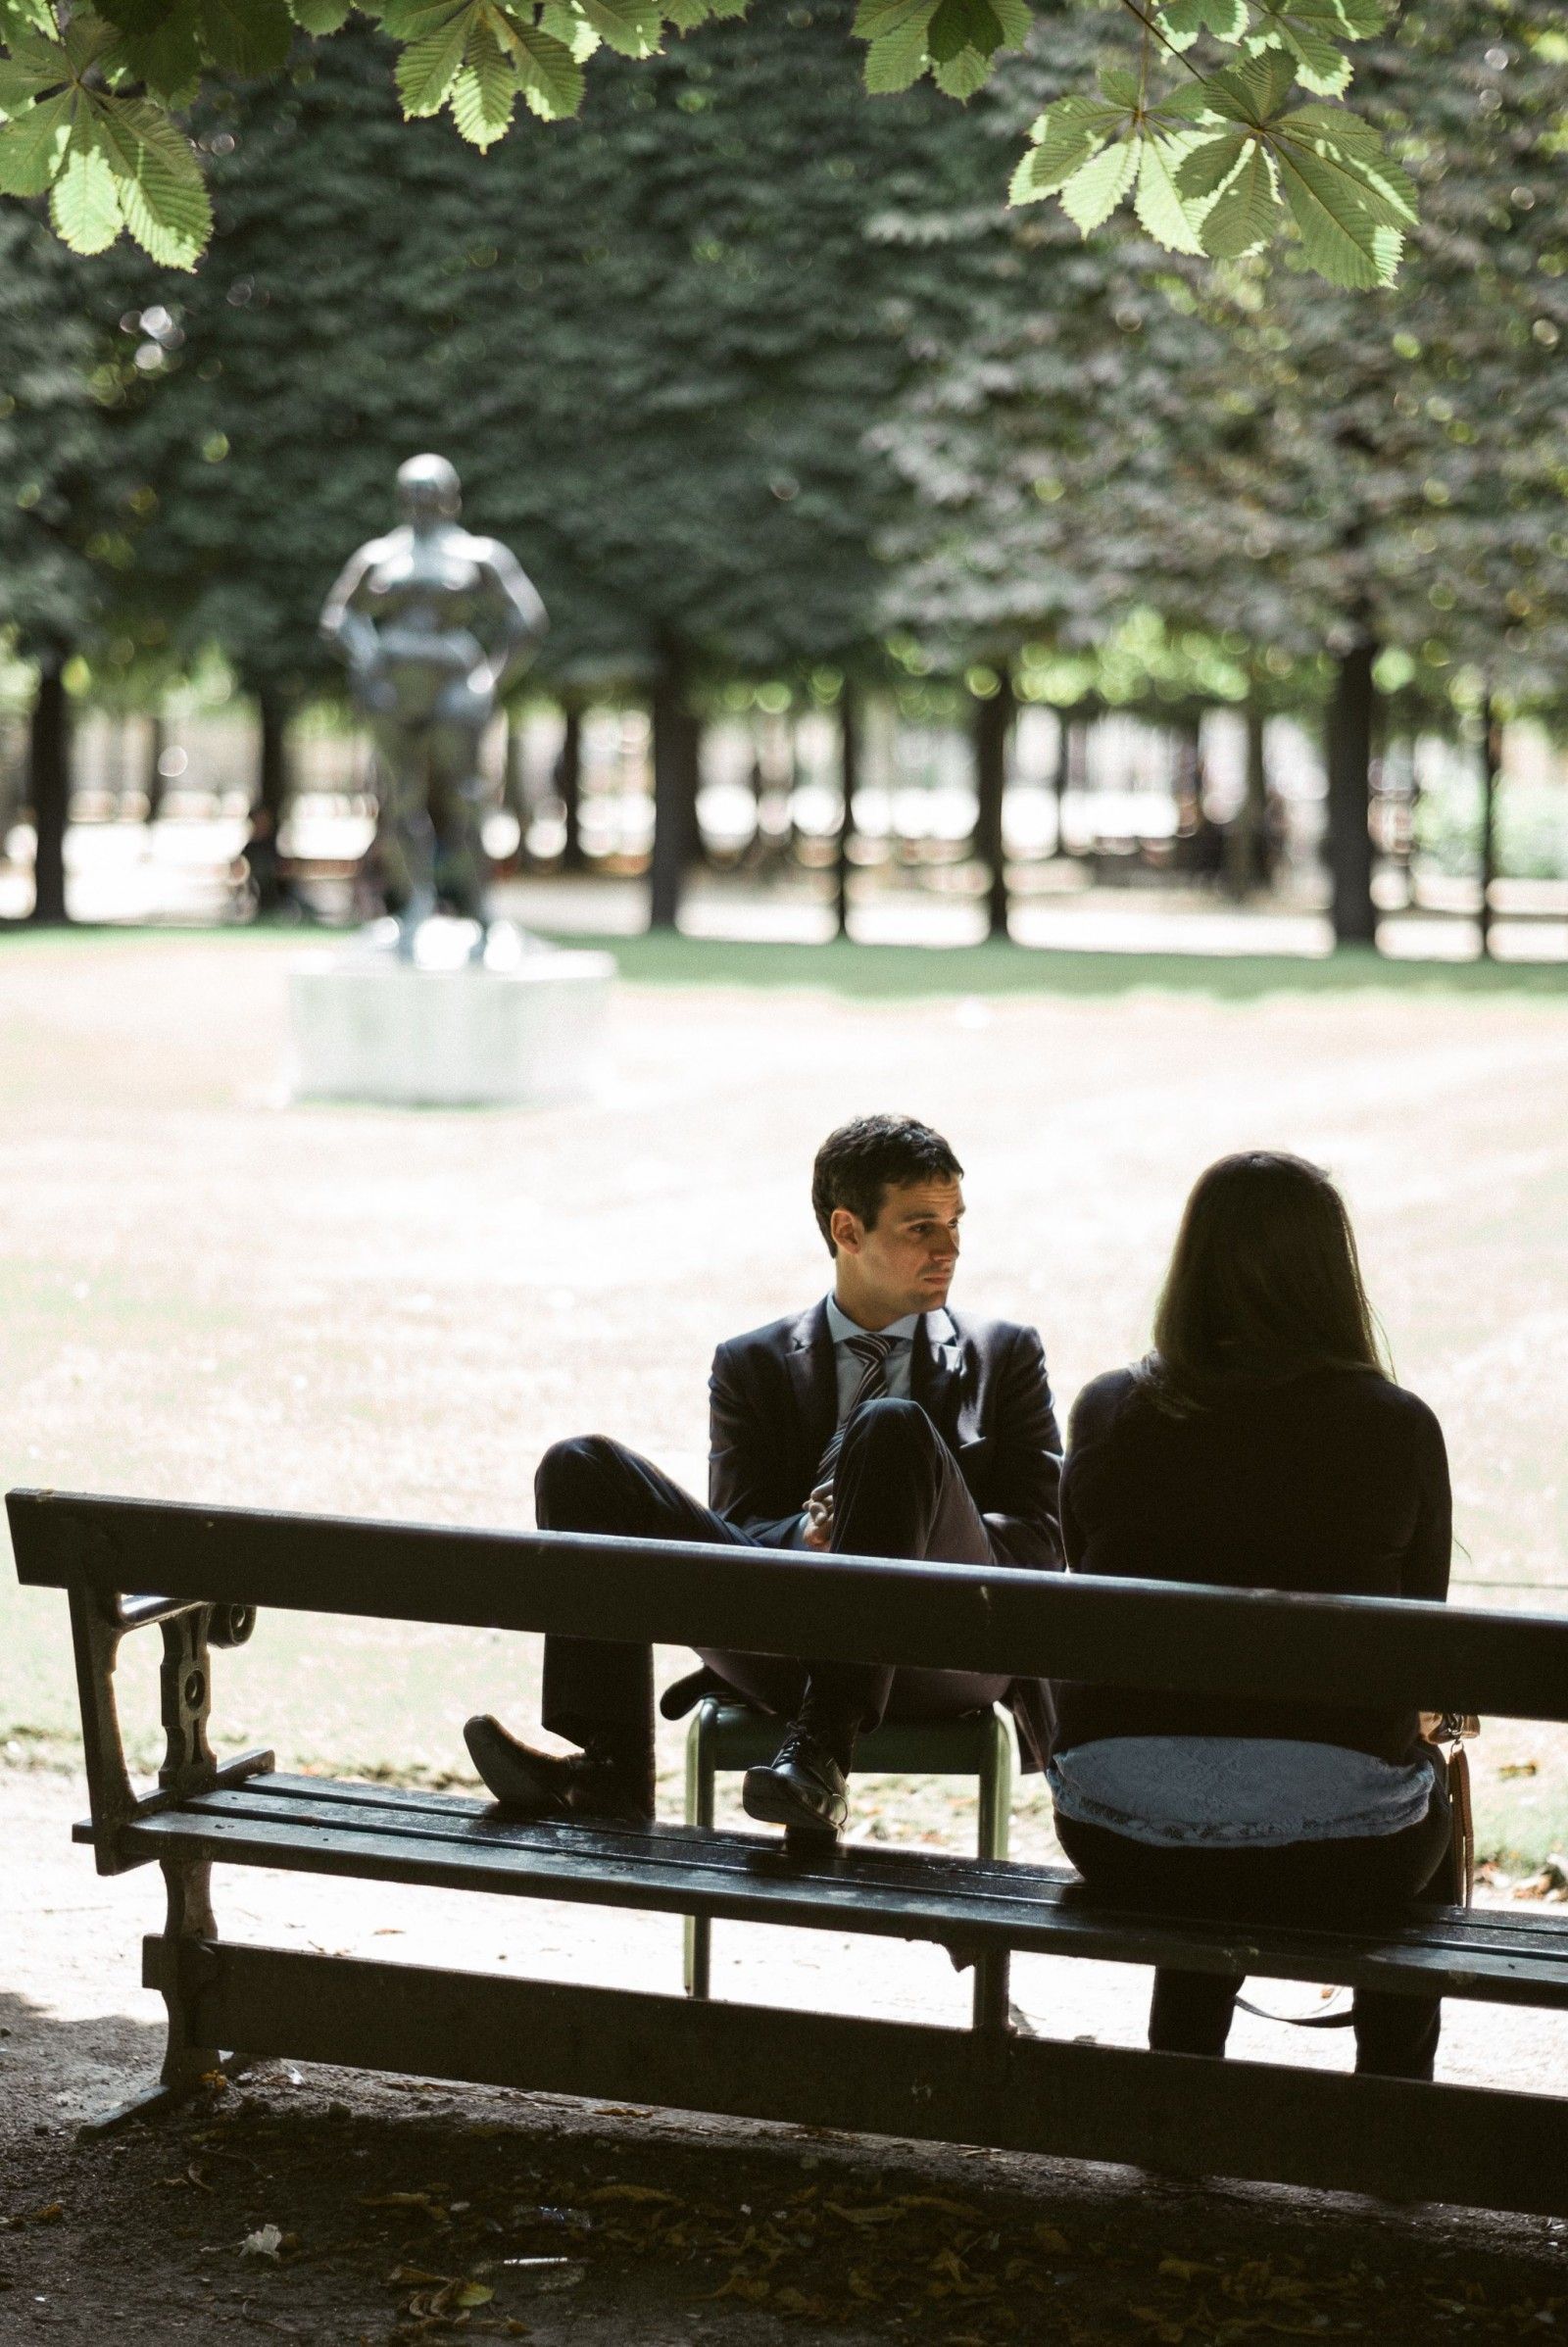 A young man together with a young woman in the park.